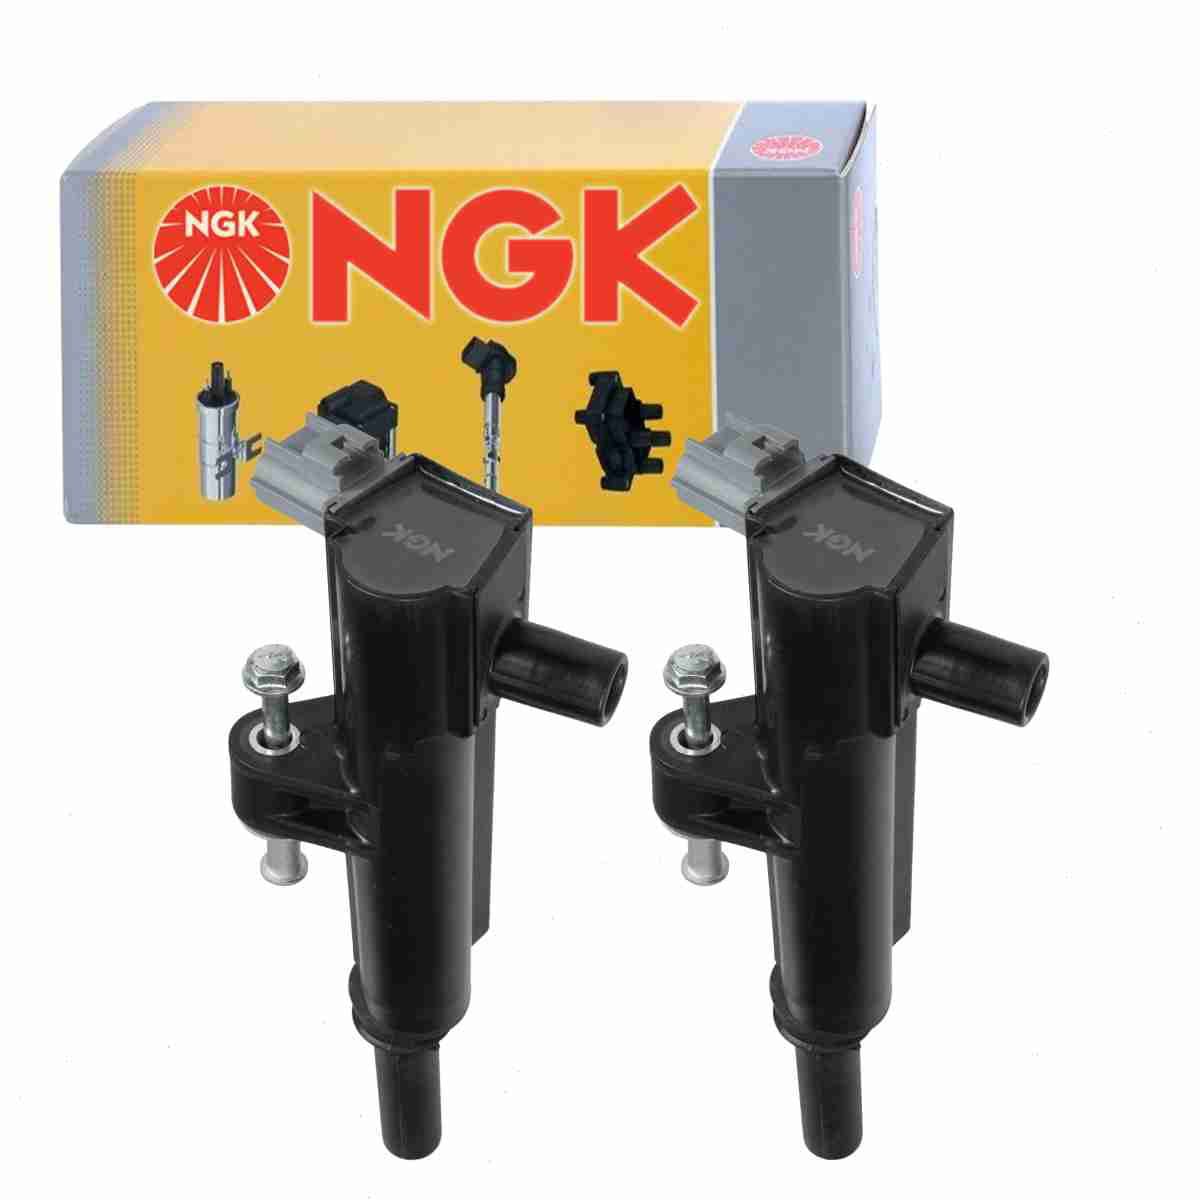 2 pc NGK 48937 Ignition Coils for 2505-484784 36-8189 5149049AB